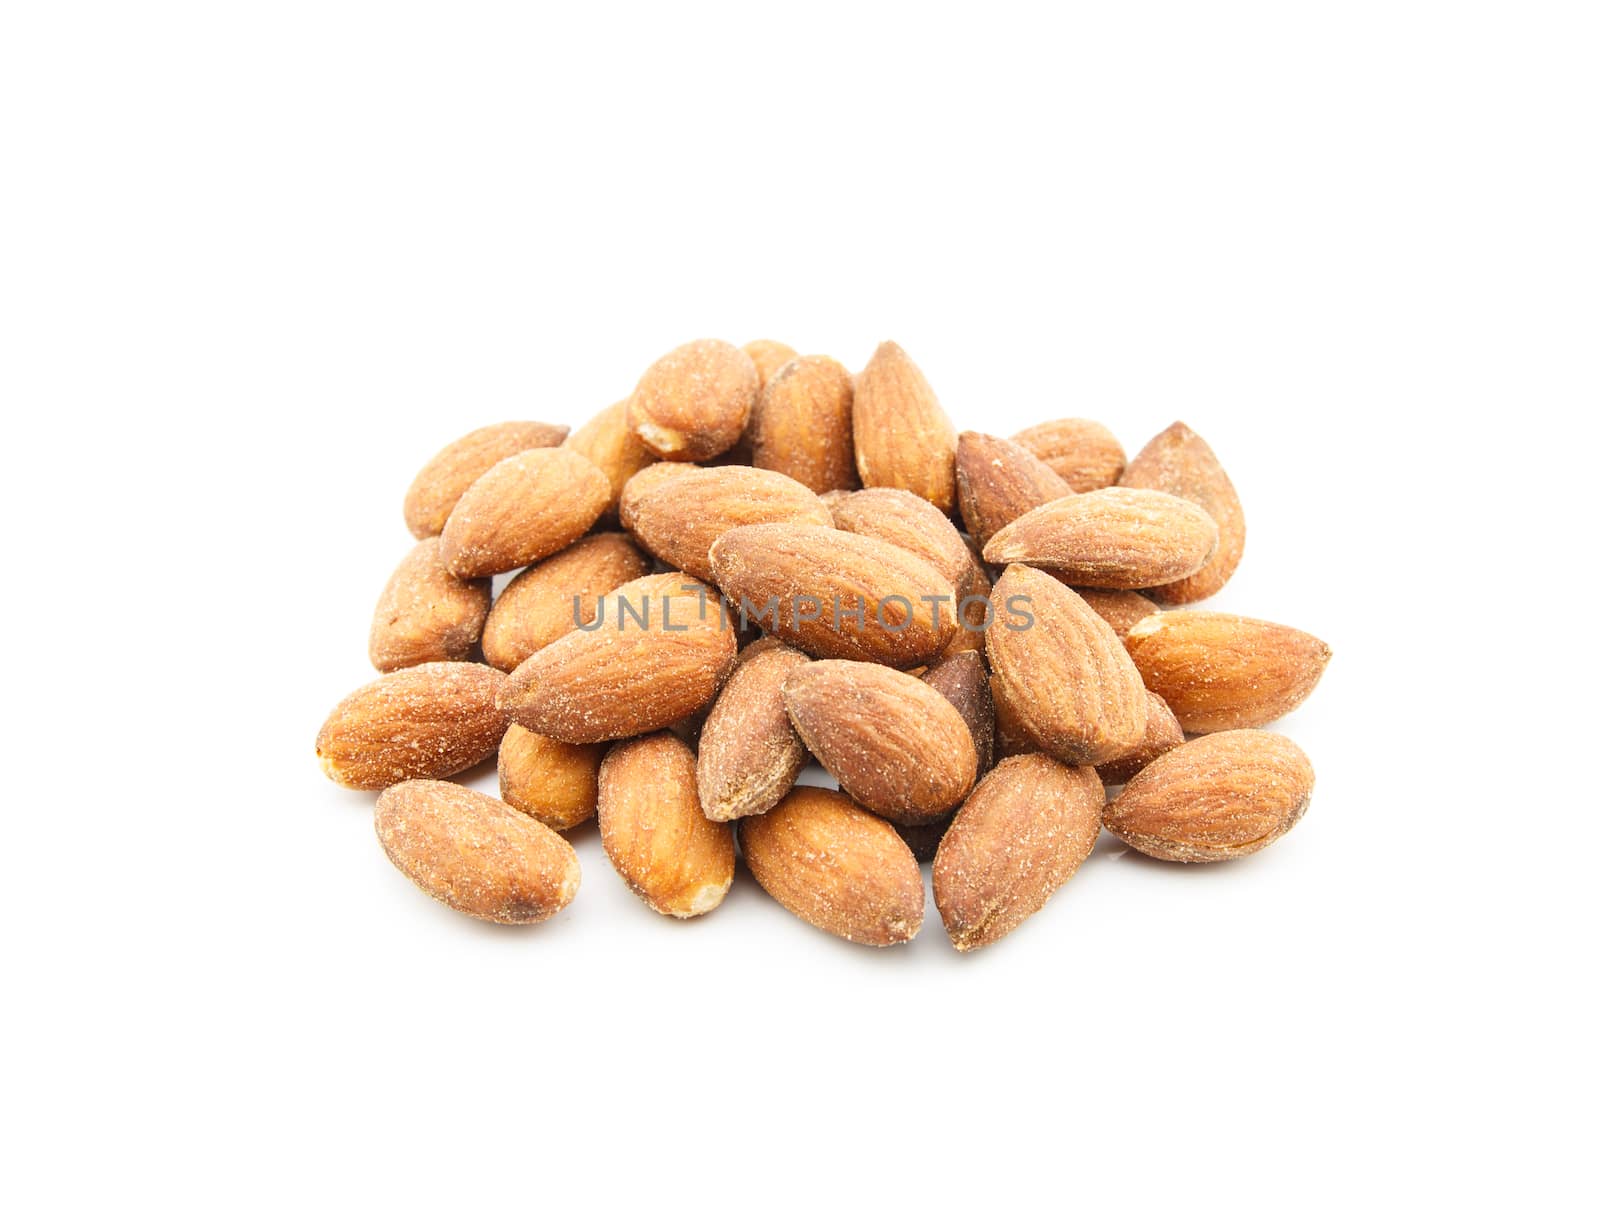 Almond on white background by vitawin